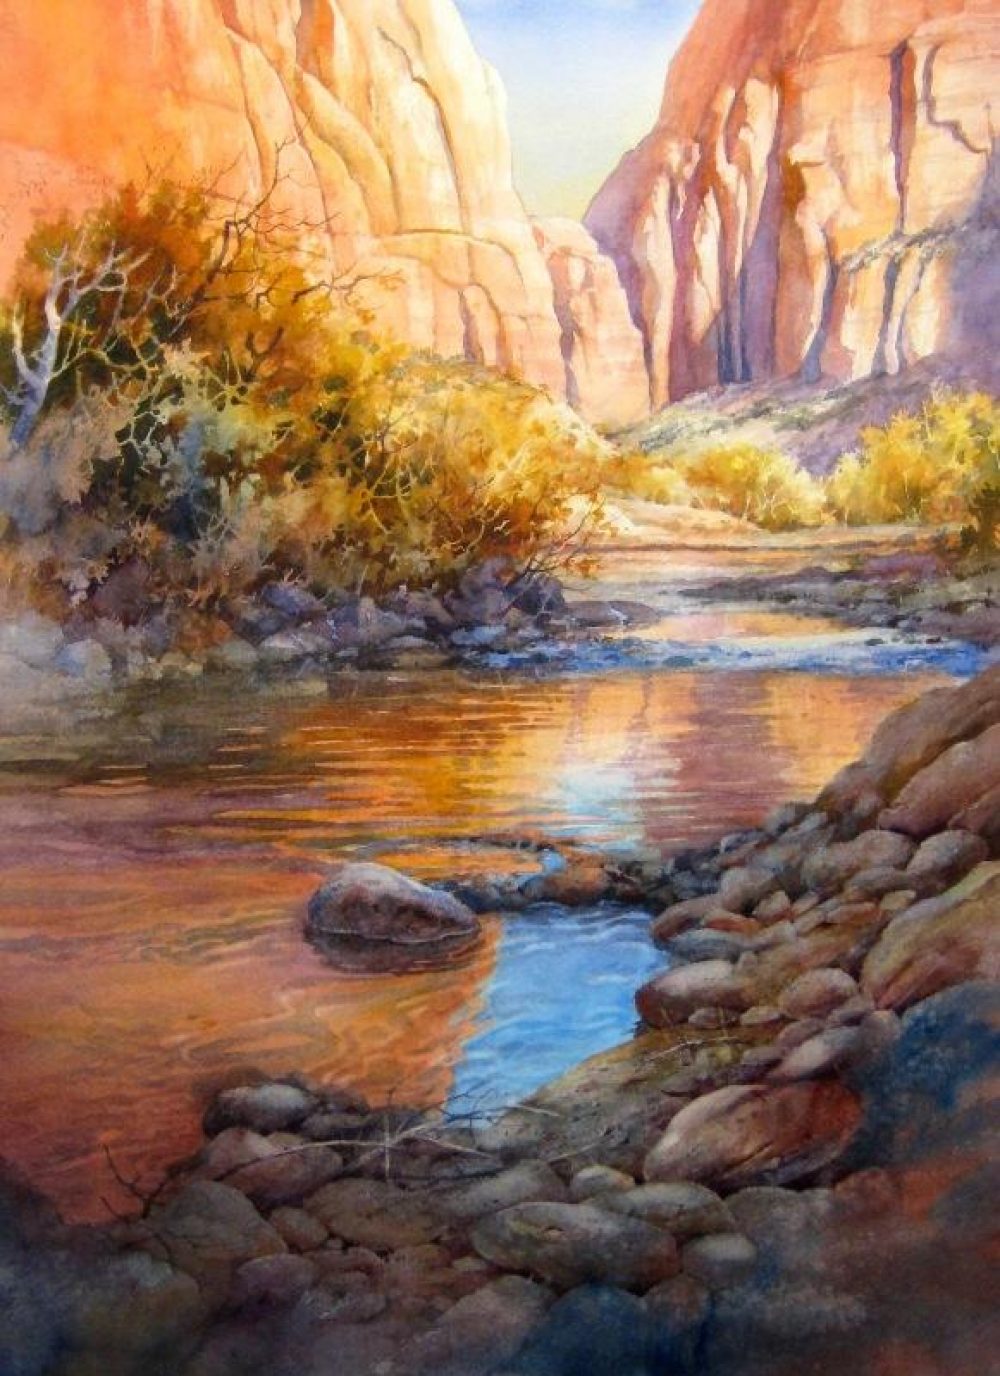 A patch of Blue - Painting of Virgin River in Zion Canyon - original Watercolor Painting of Zion National Park by Roland Lee